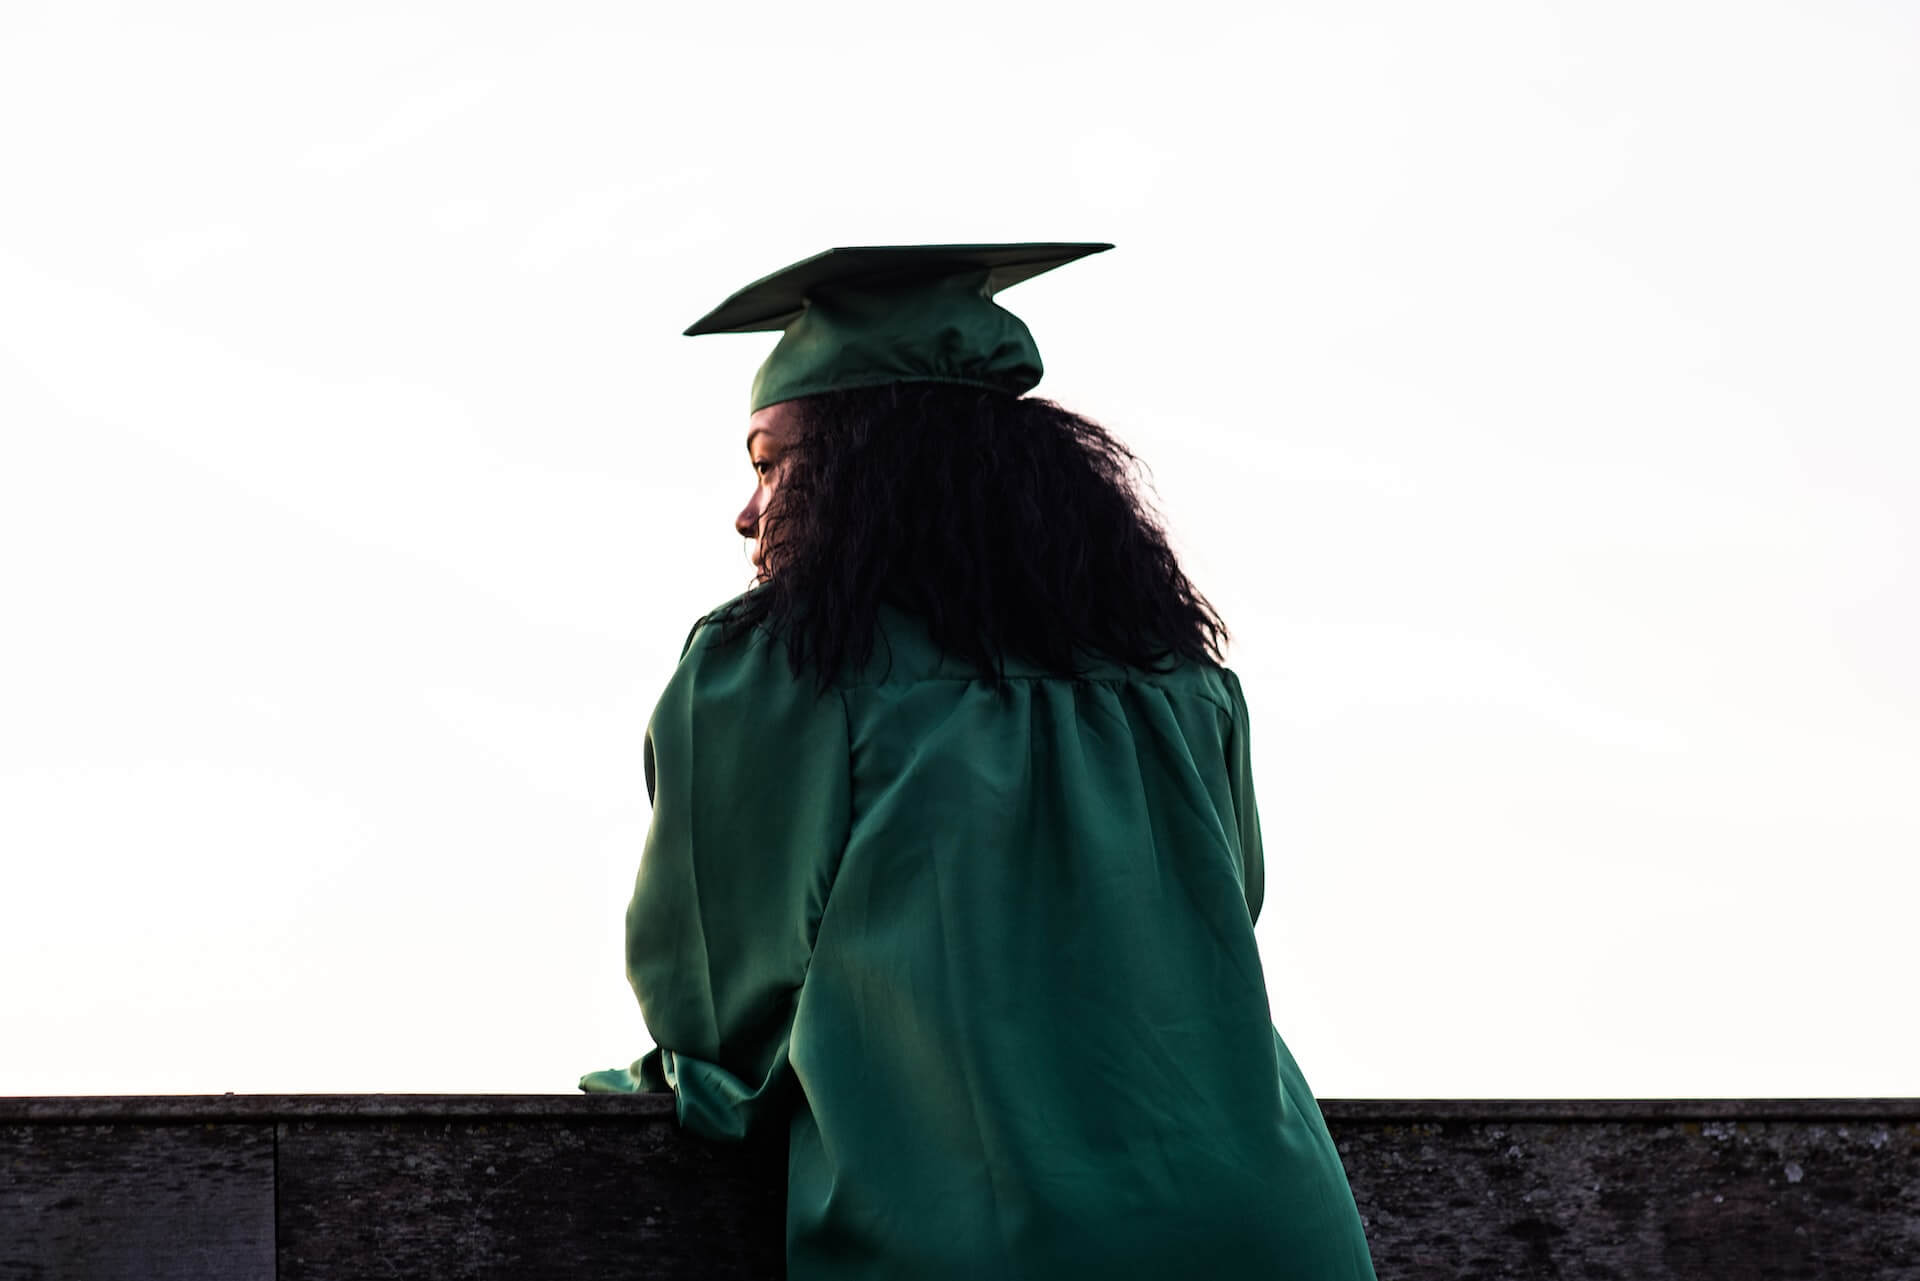 student in graduation gown leaning on ledge